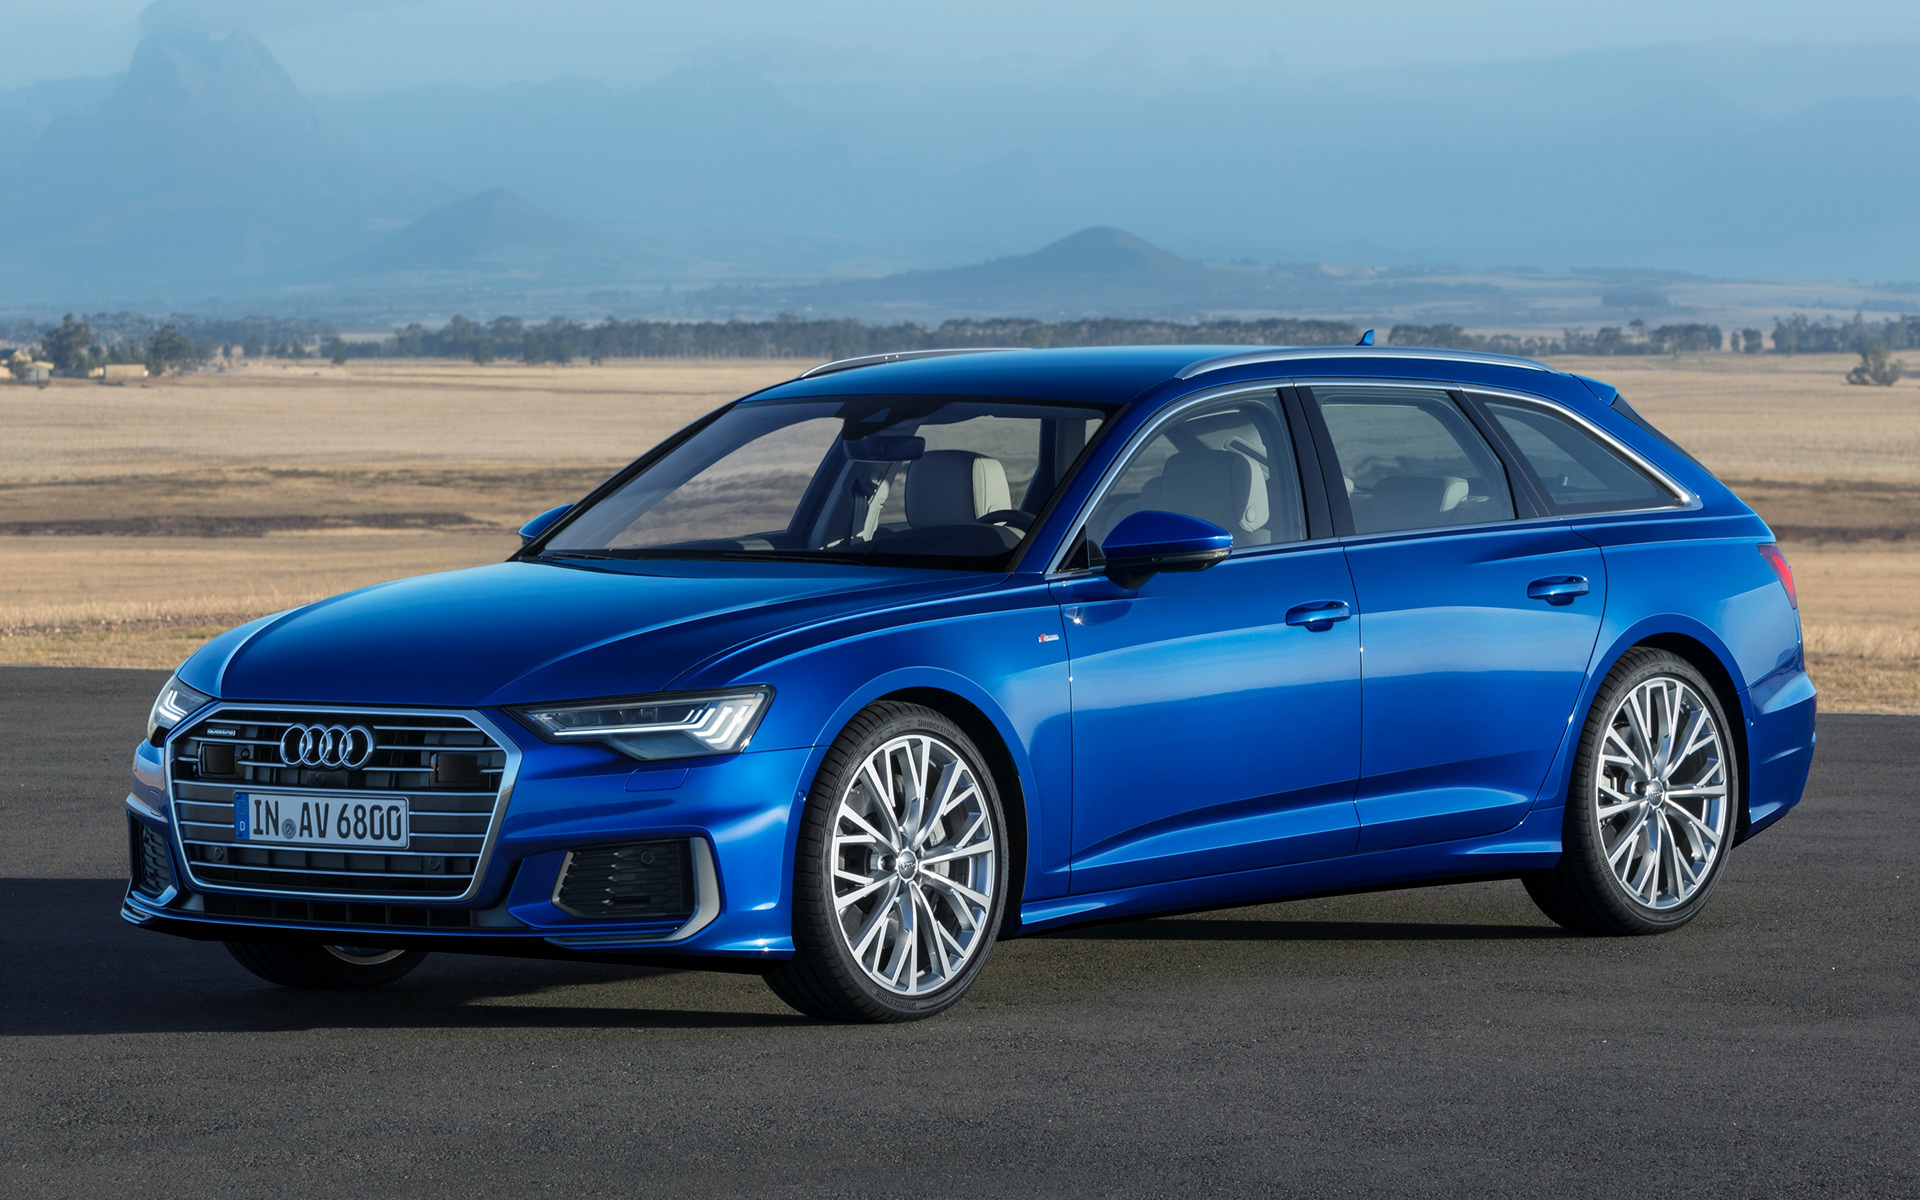 2018 Audi A6 Avant S line - Wallpapers and HD Images | Car Pixel